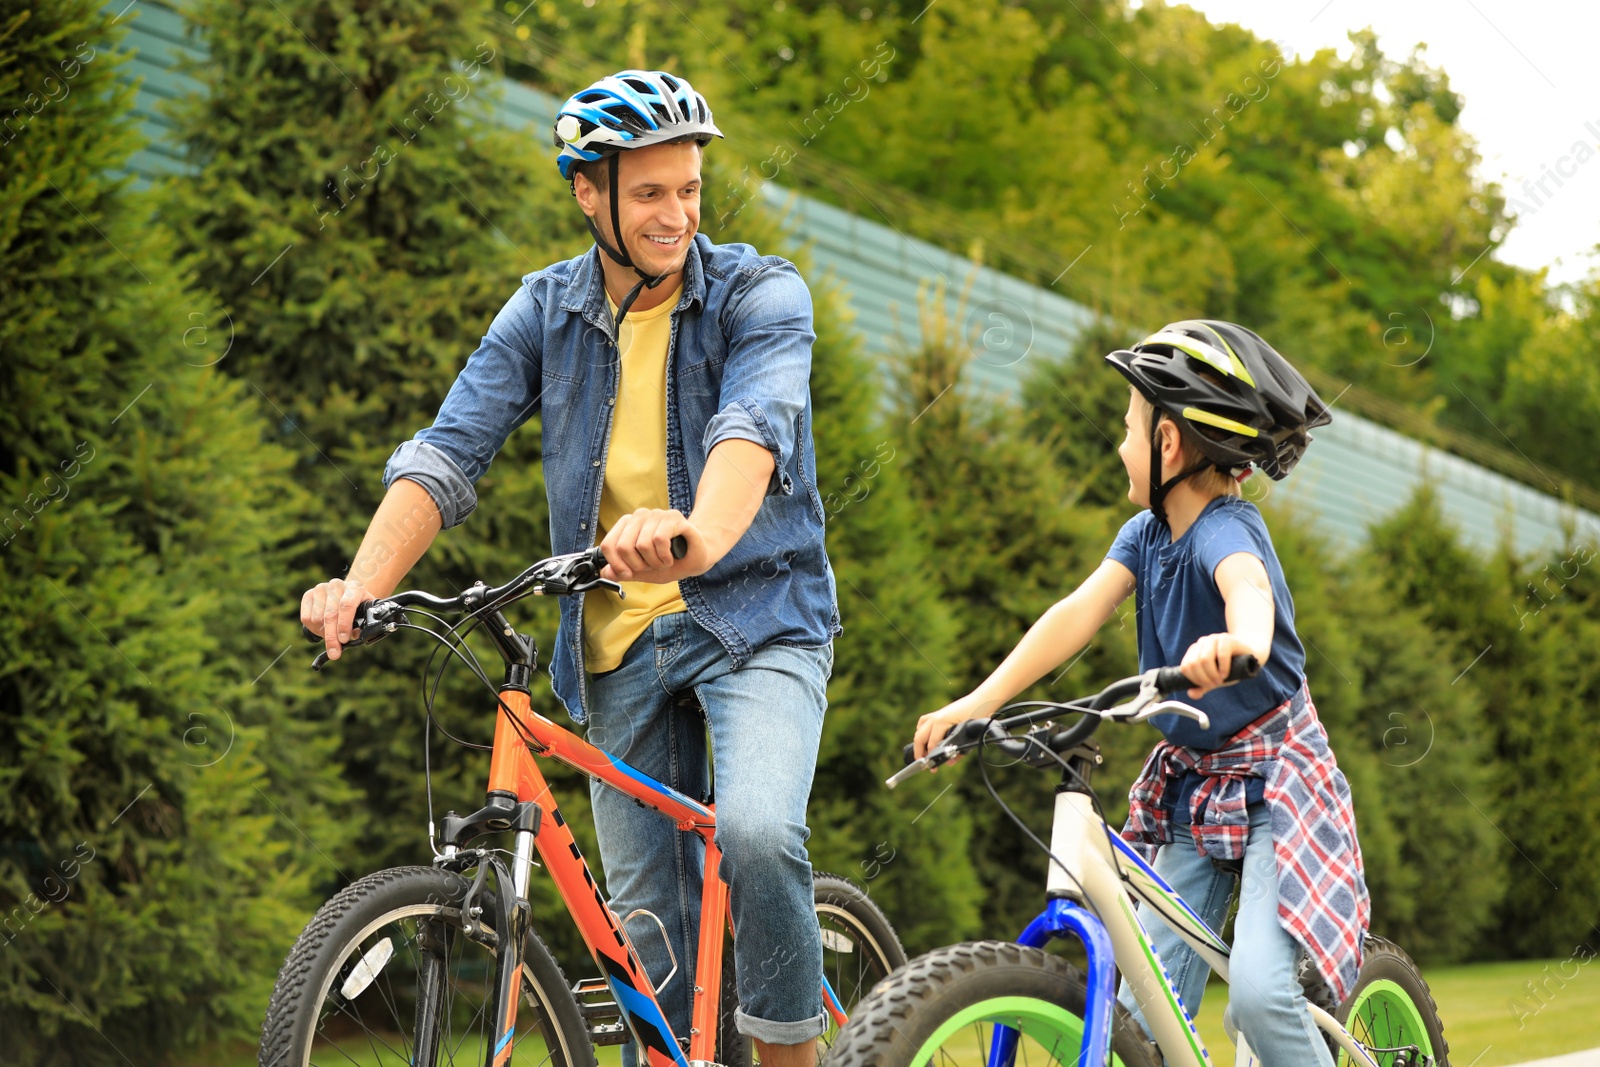 Photo of Dad and son riding modern bicycles outdoors